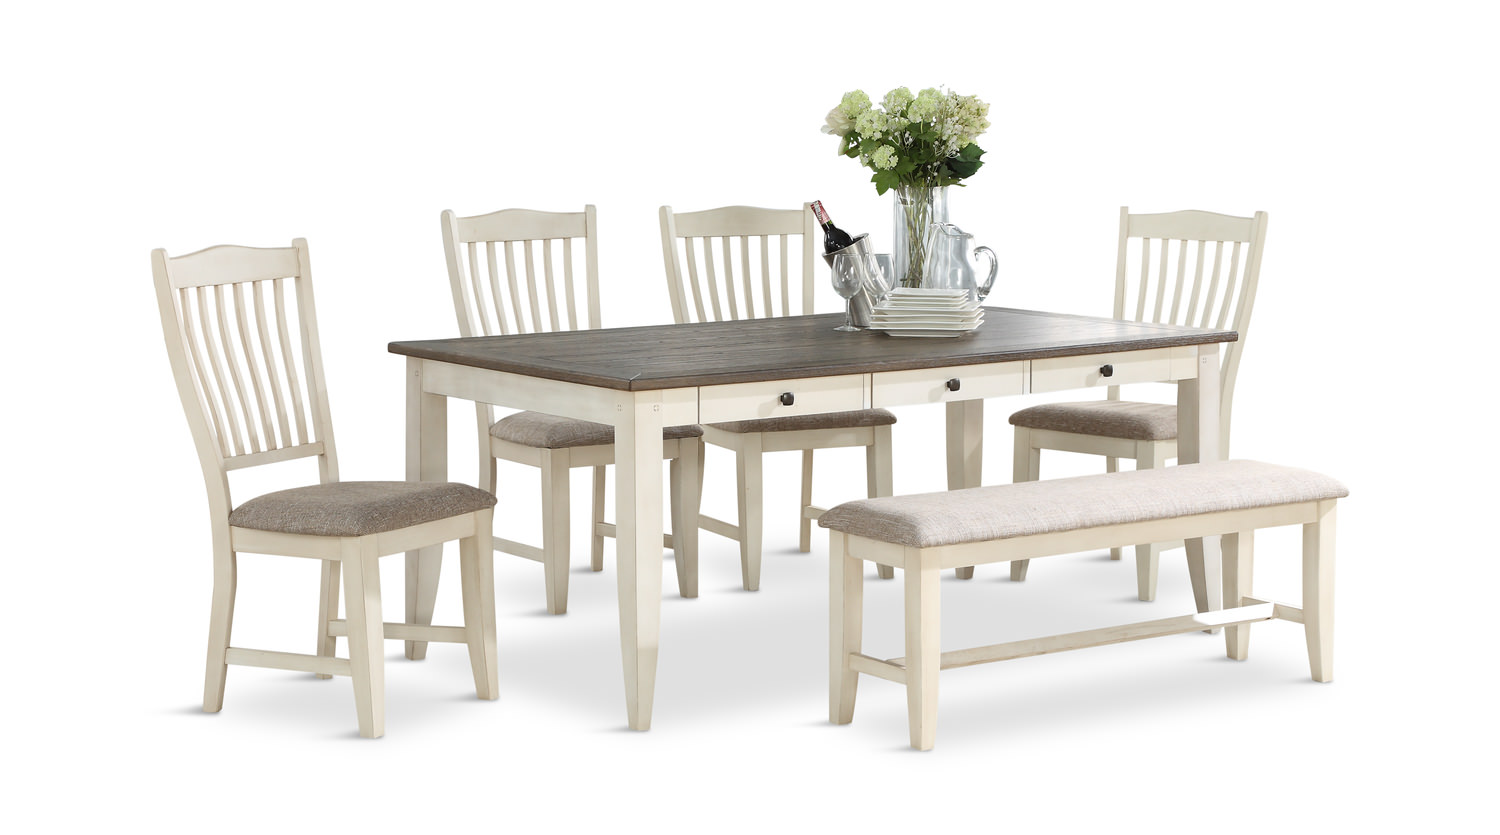 Columbia Leg Table With 4 Chairs And Dining Hom Furniture